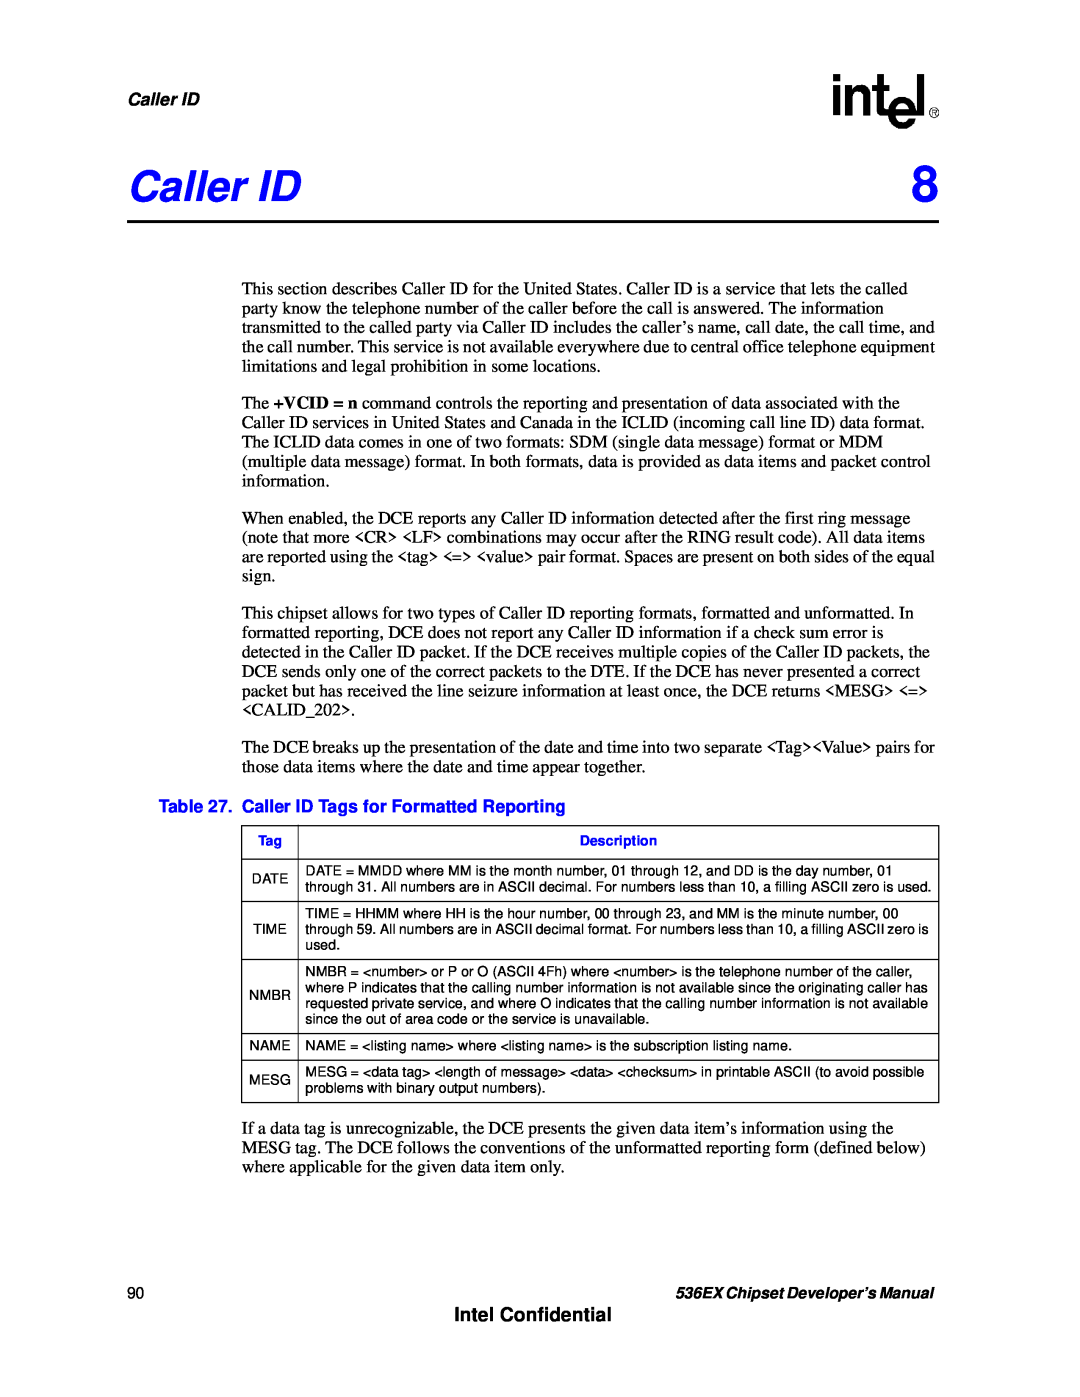 Intel 537EX manual Intel Confidential, Caller ID Tags for Formatted Reporting 